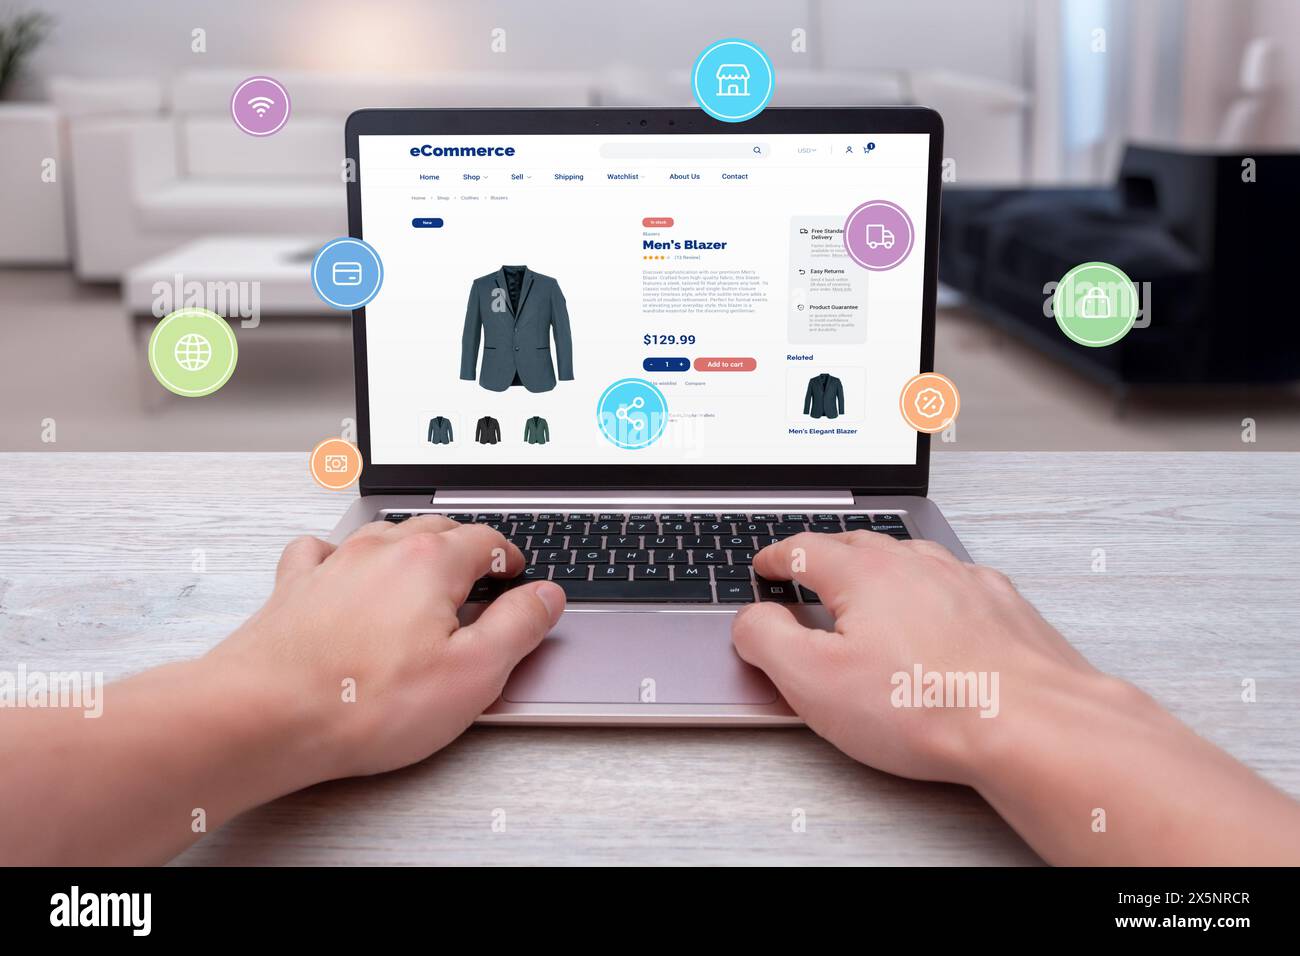 Hands typing on laptop, shopping online for men's blazer with levitating shopping icons. Modern concept of digital shopping convenience Stock Photo